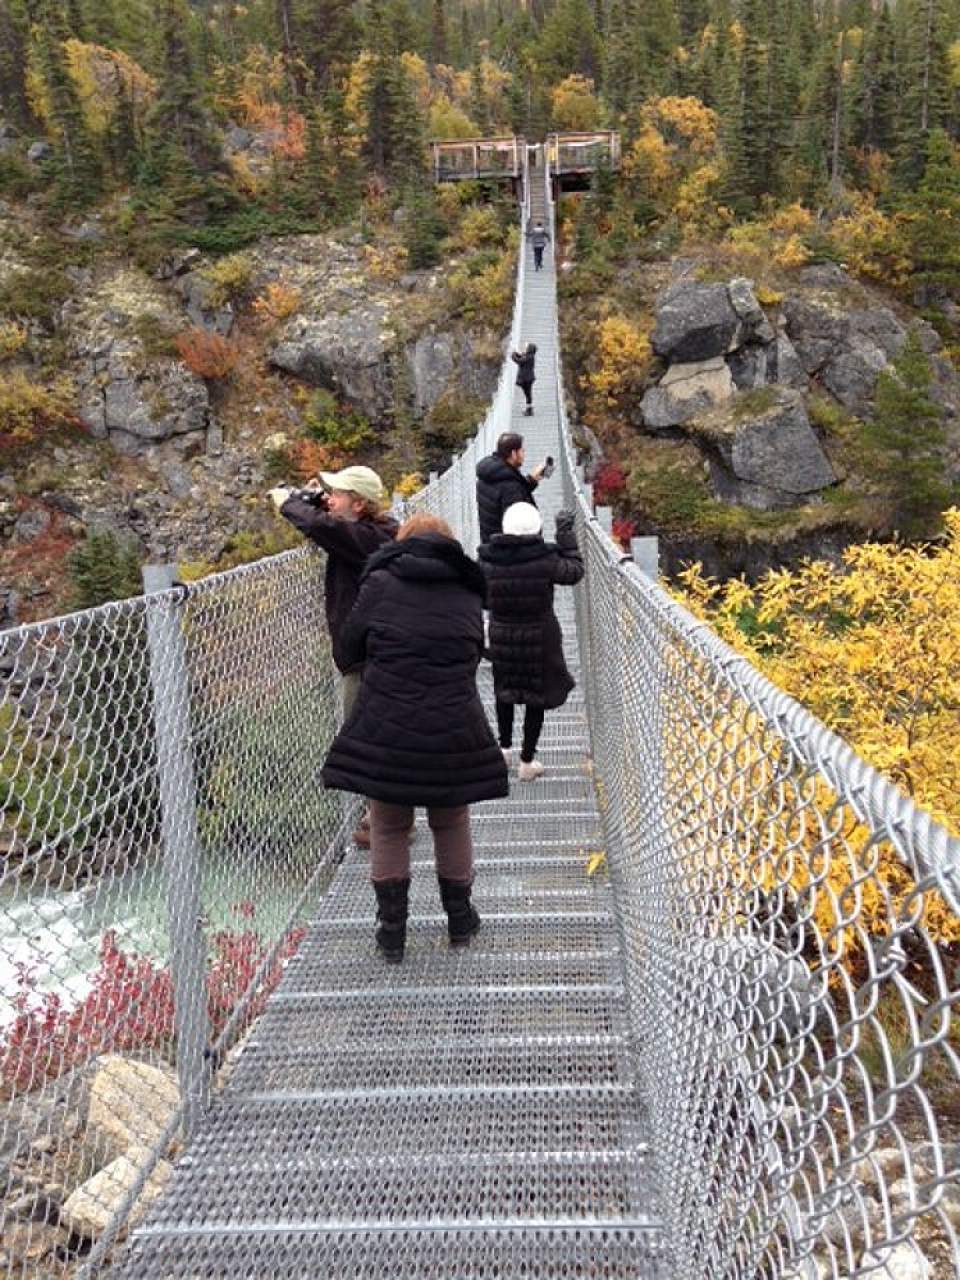 Guests take in the sights from the Yukon Suspension Bridge